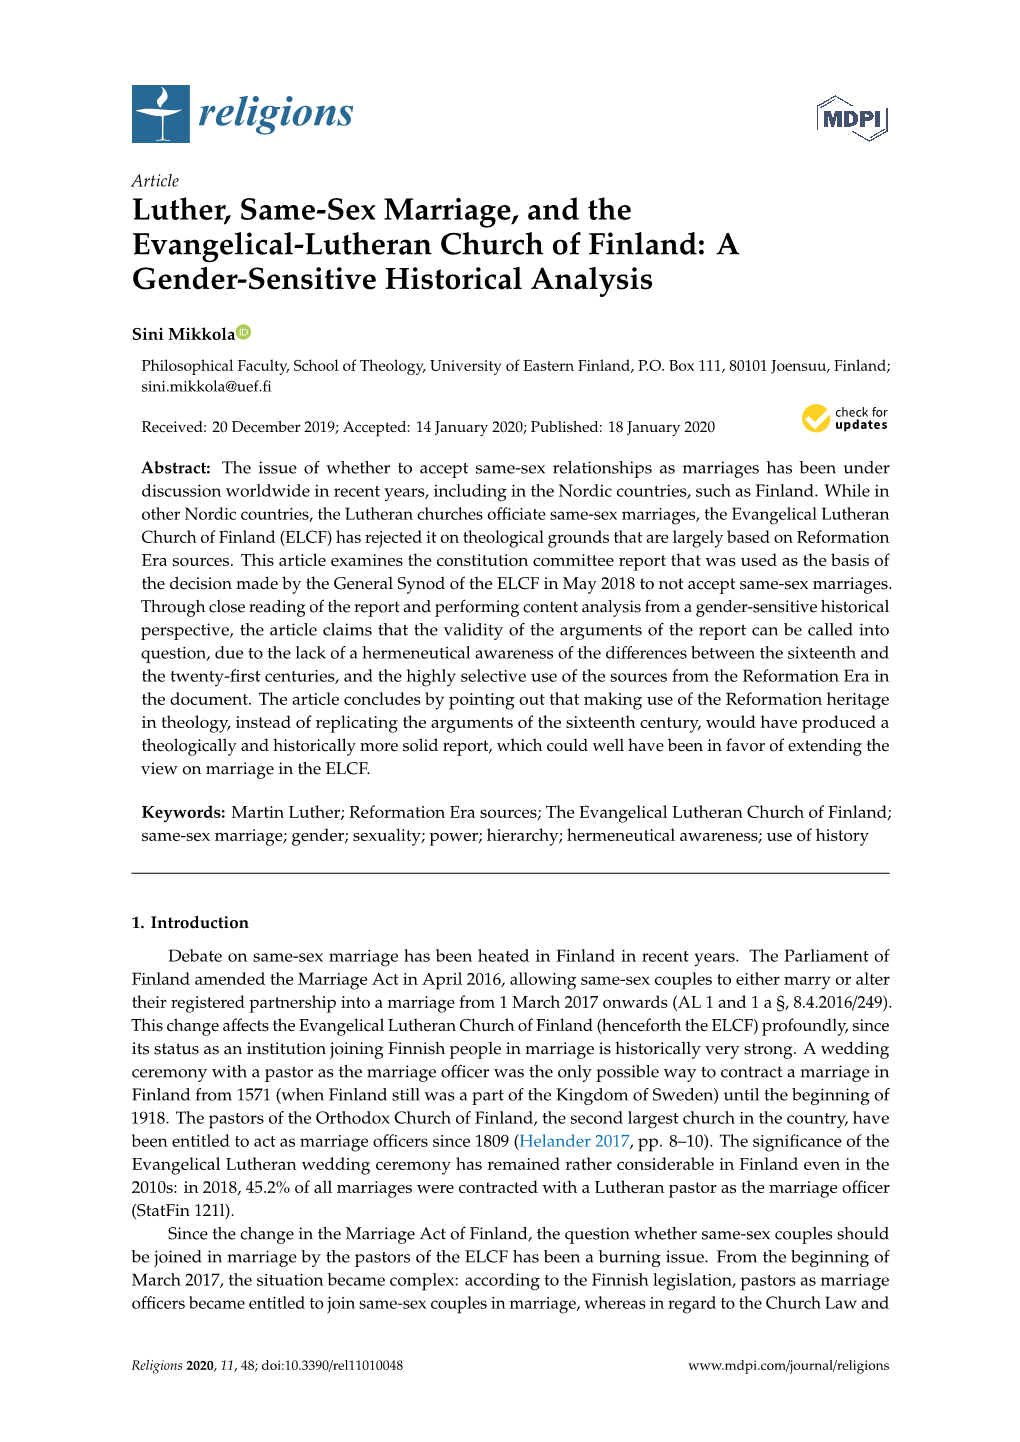 Luther, Same-Sex Marriage, and the Evangelical-Lutheran Church of Finland: a Gender-Sensitive Historical Analysis